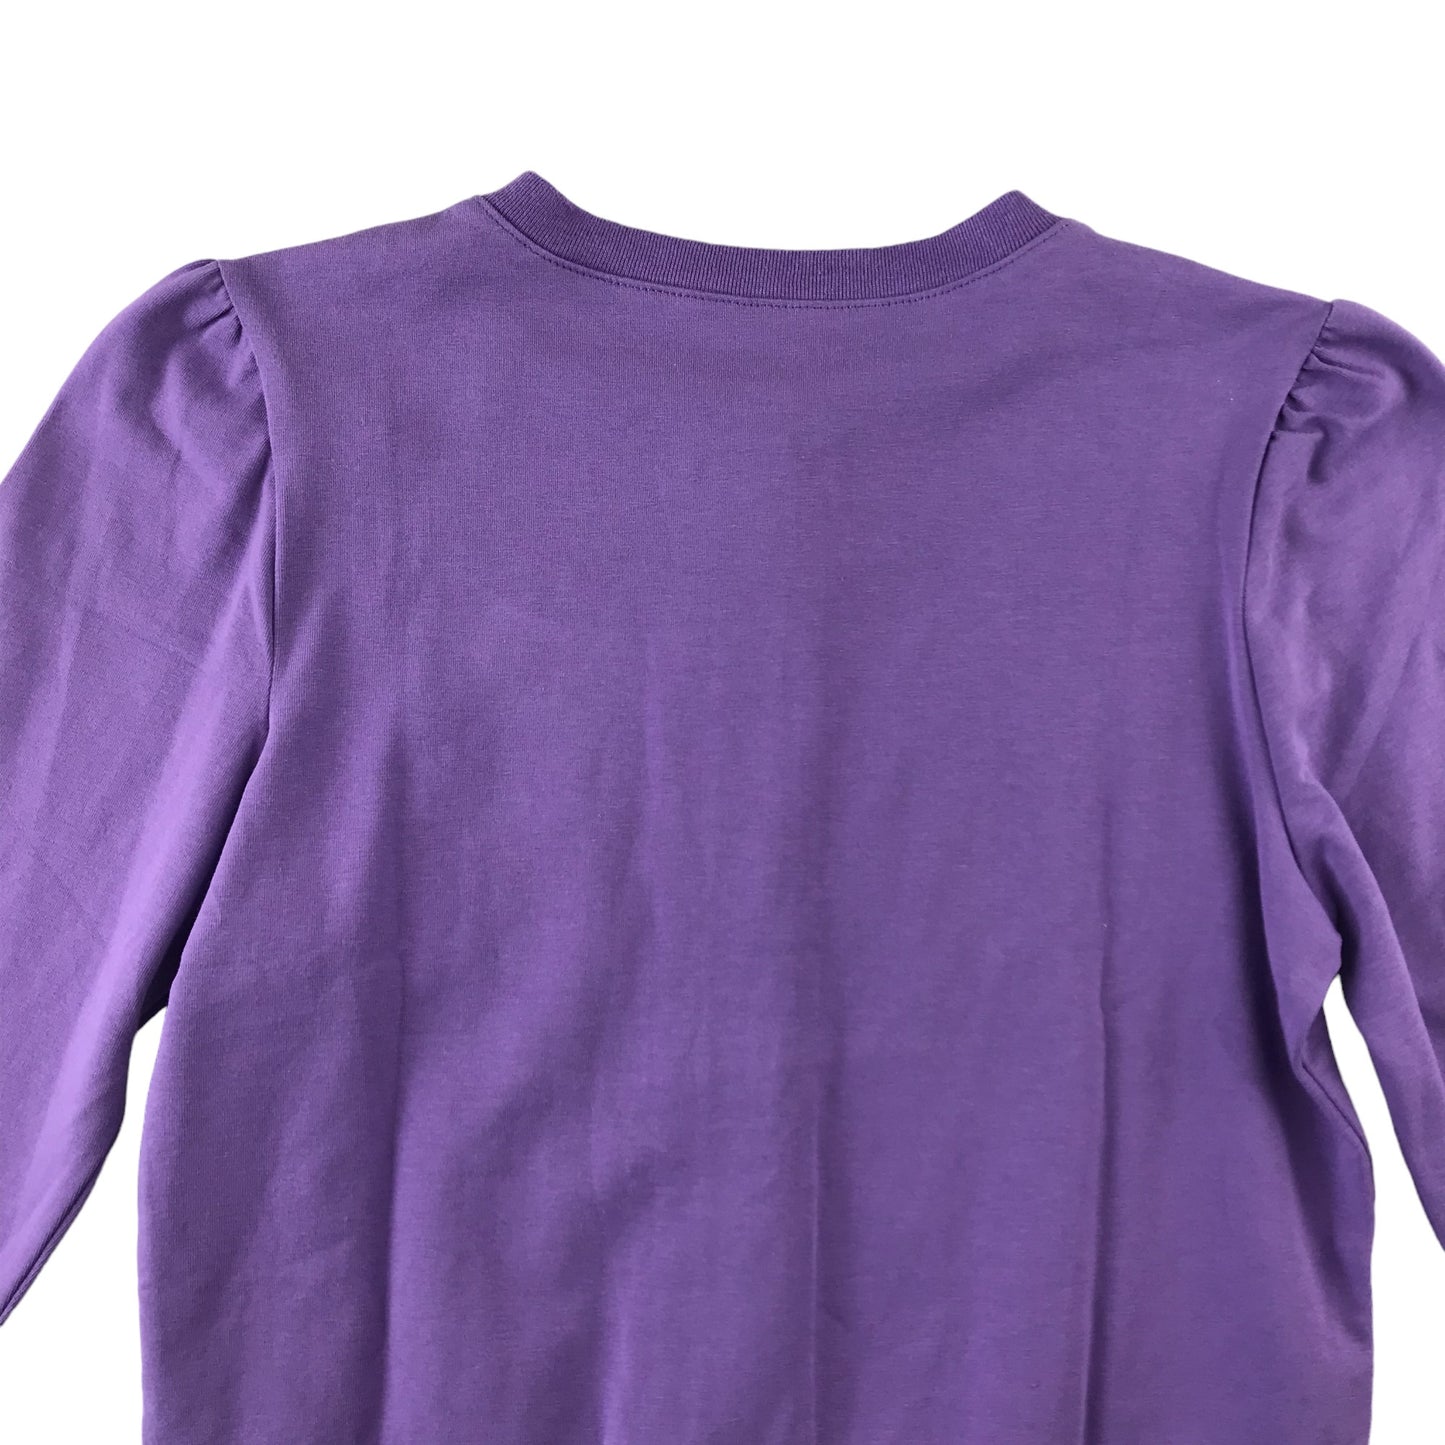 The Children's Place Cardigan 10 years purple mesh butterfly details cropped